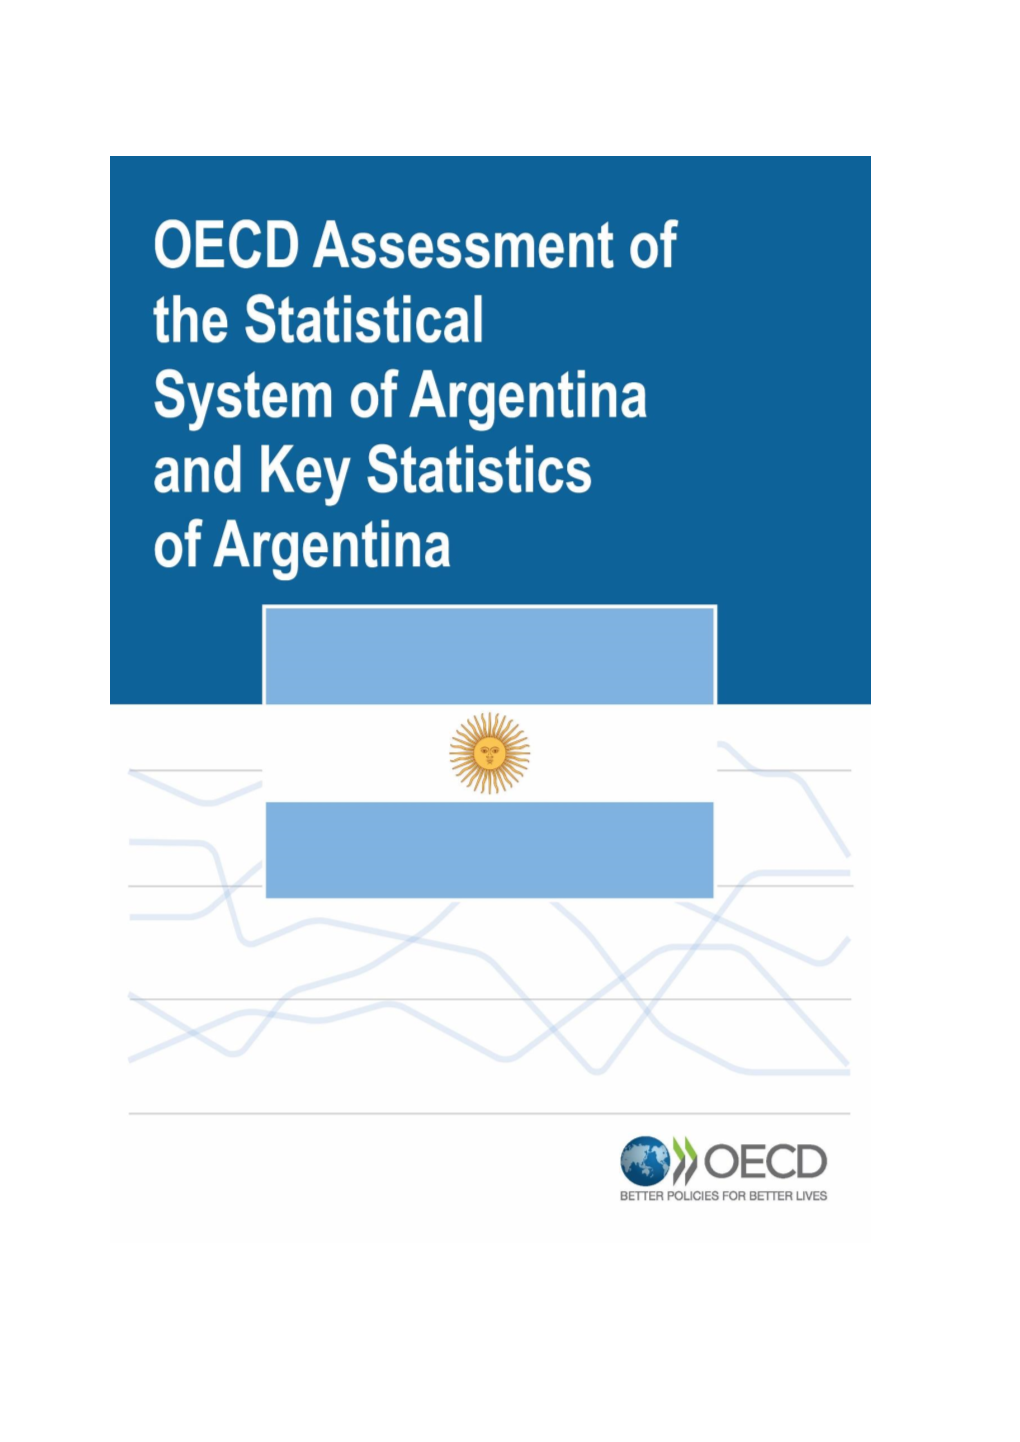 Oecd Review of the Statistical System and Official